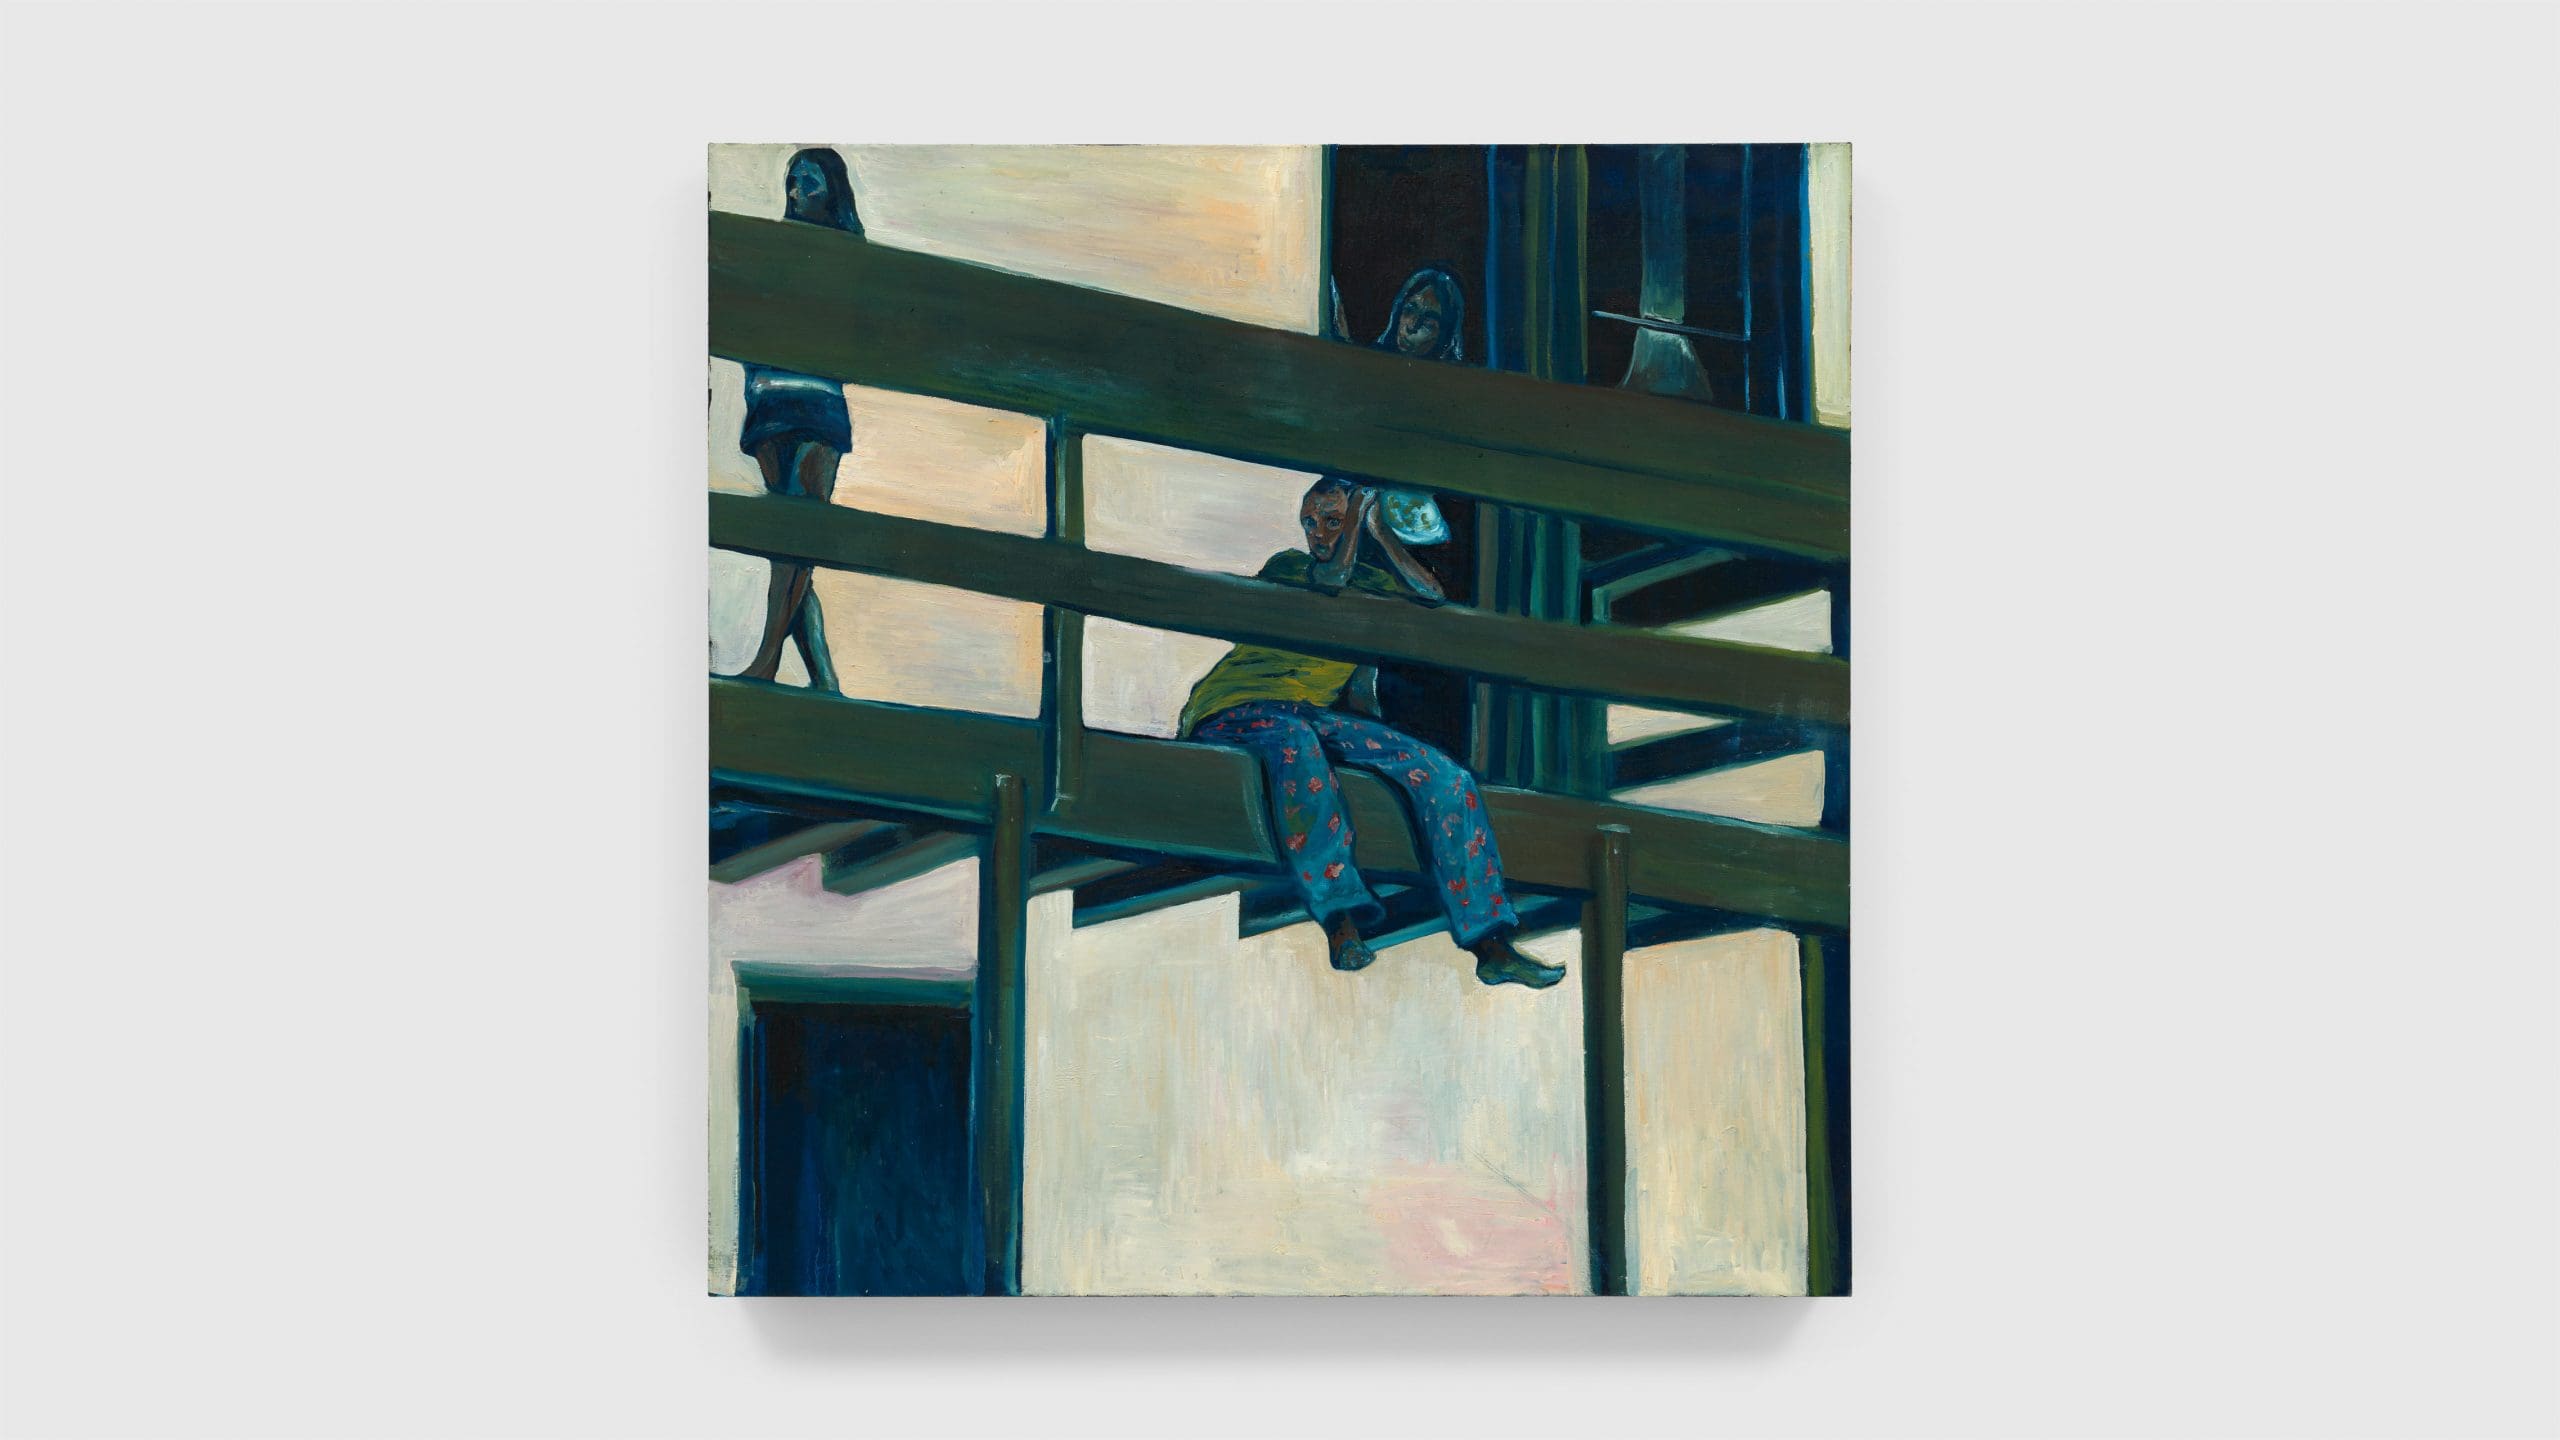 Noah Davis Another Balcony, 2009 Oil and acrylic on linen 48 x 48 inches (121.9 x 121.9 cm)